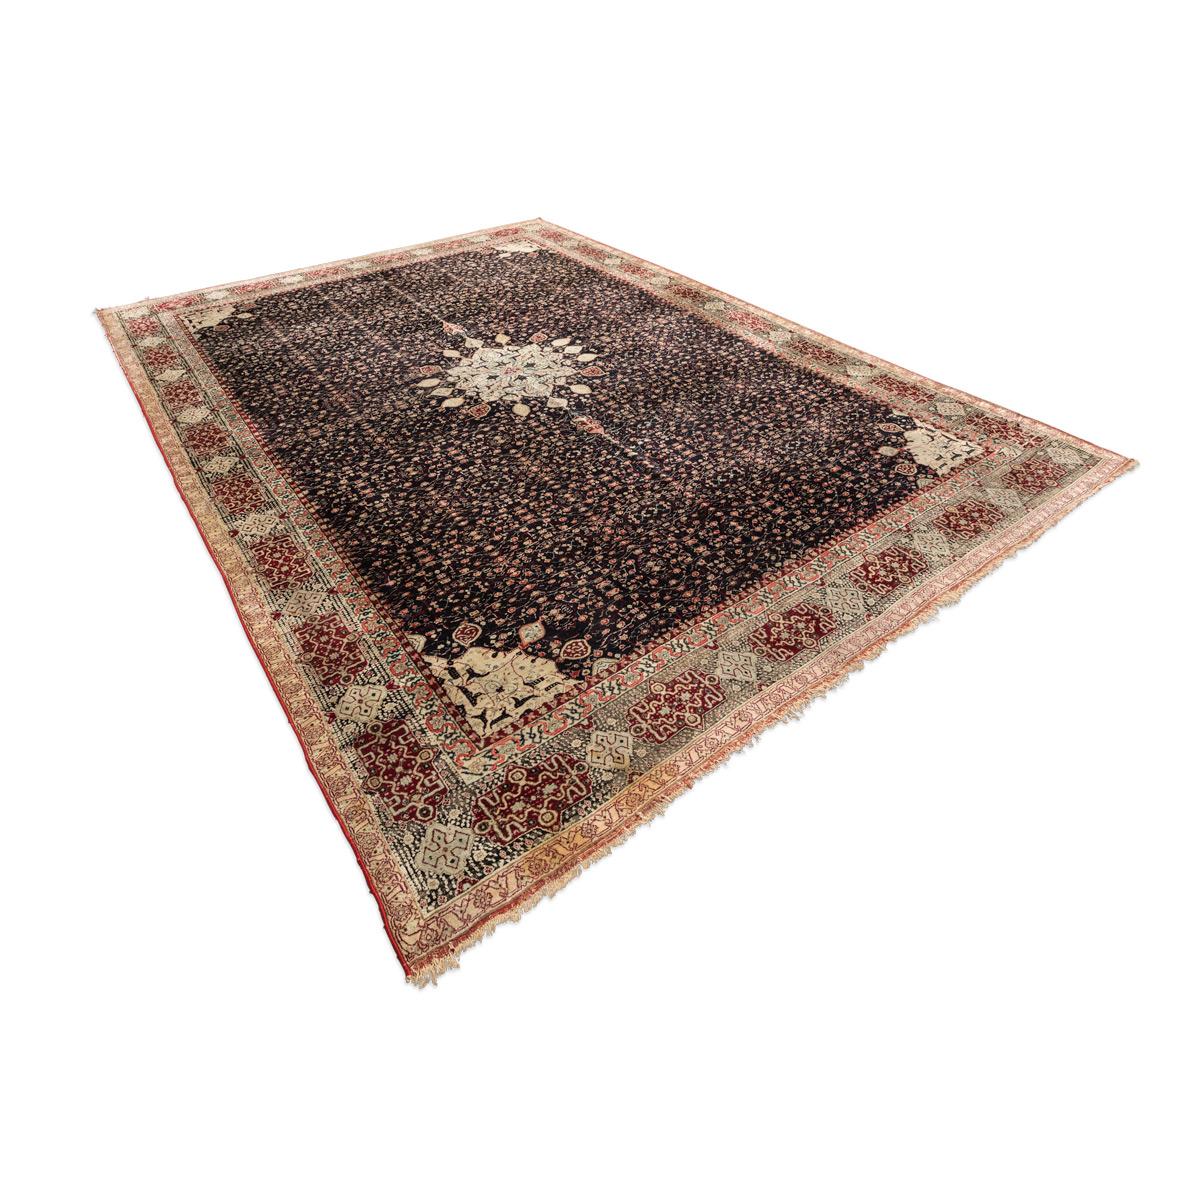 Indian Antique Agra India Wool Rug. Circa. 1930. 3.50 x 2.70 m. For Sale